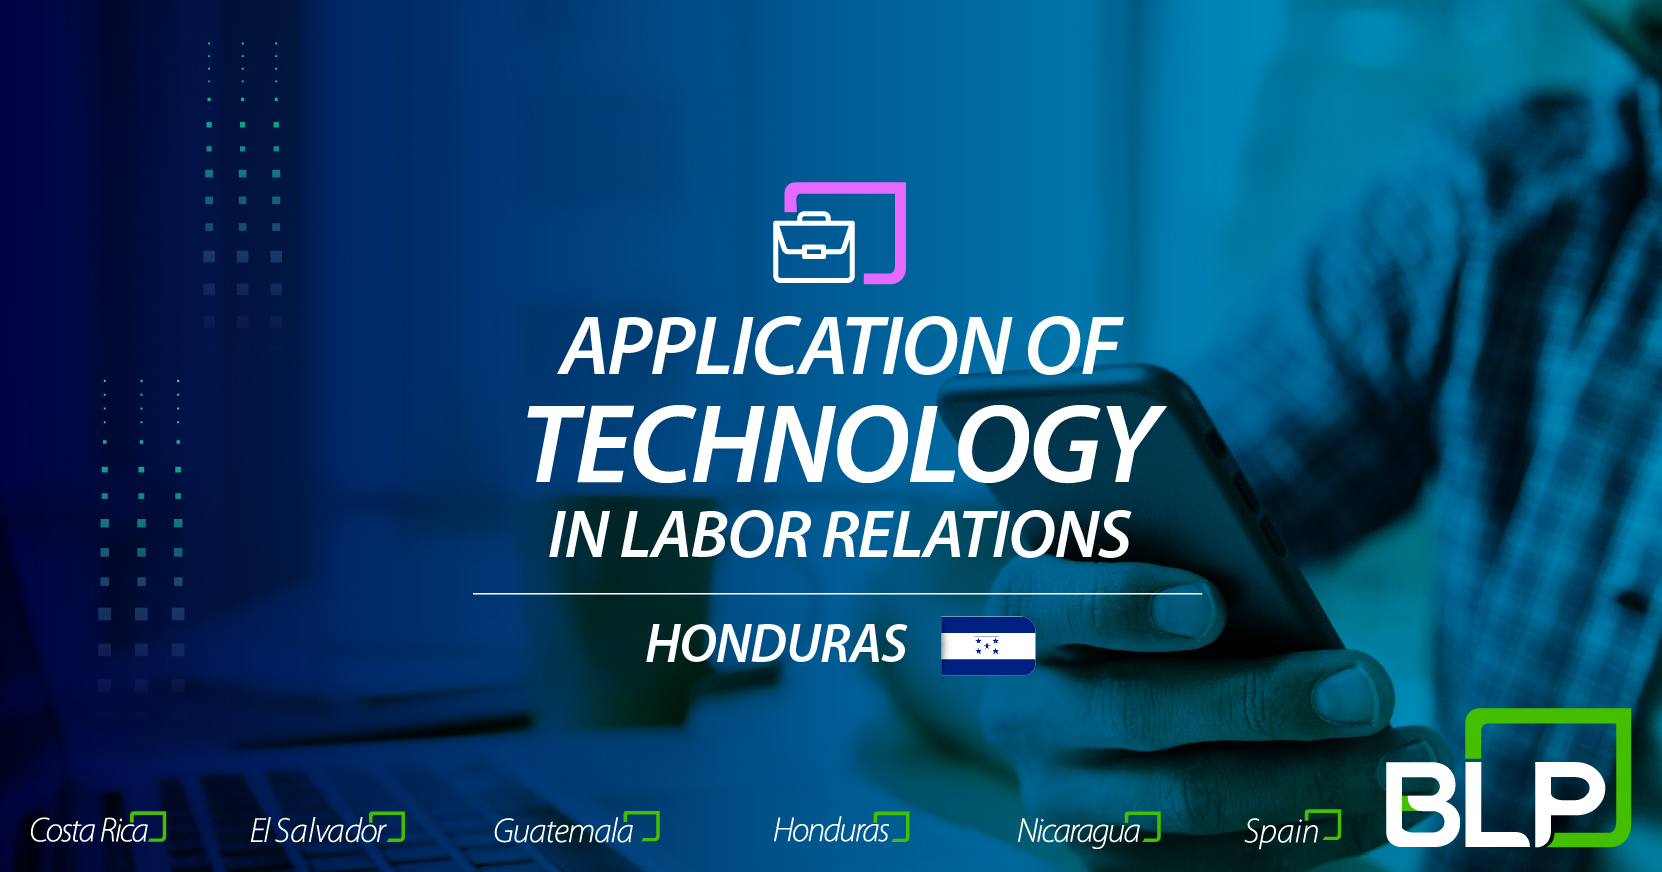 Application of technology in labor relations: perspectives from Honduras